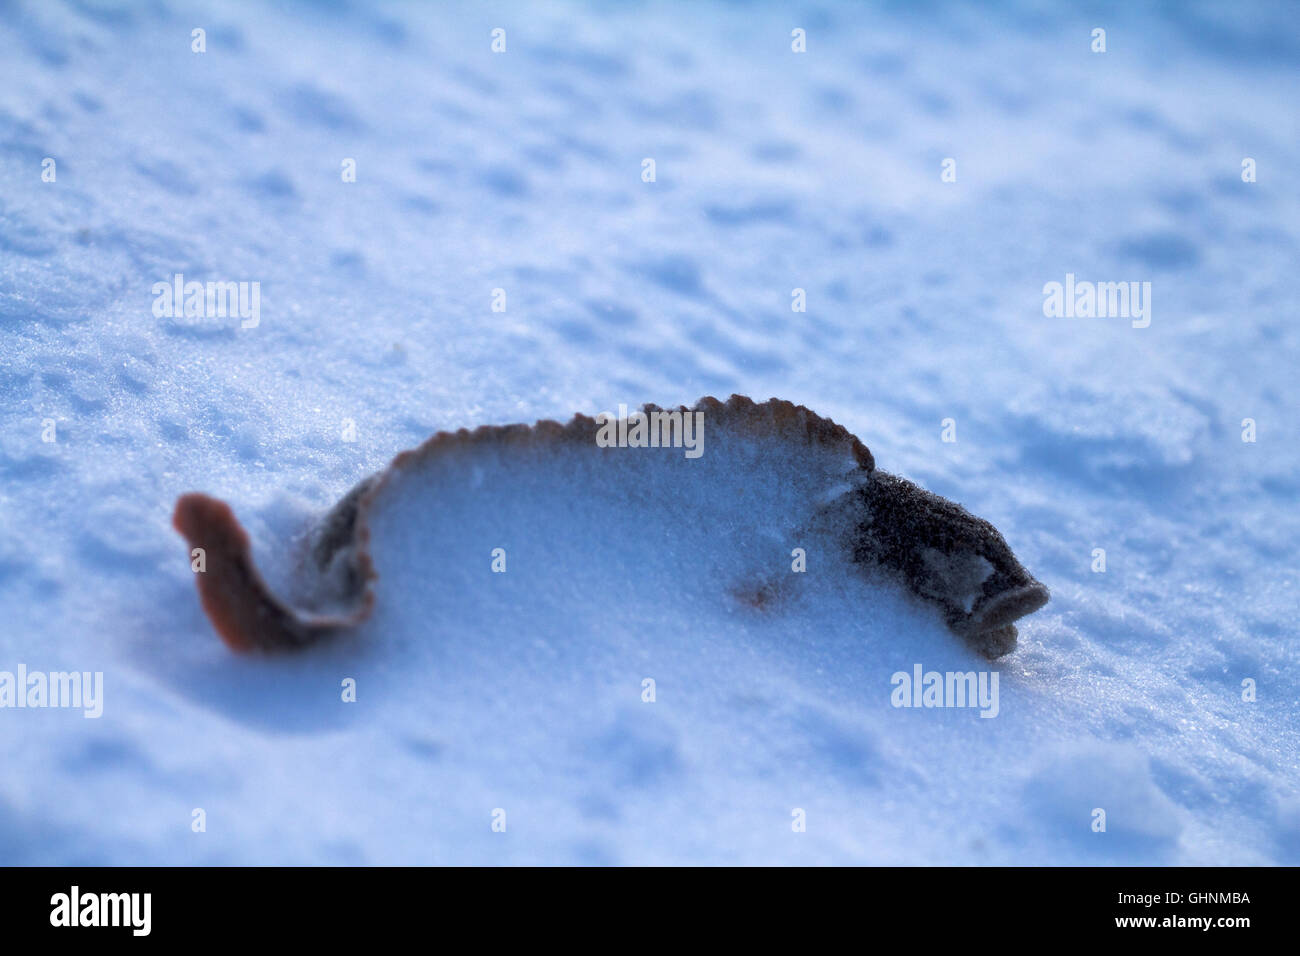 Ice fishing. Caught and snow-covered fish mother-of-eels Stock Photo